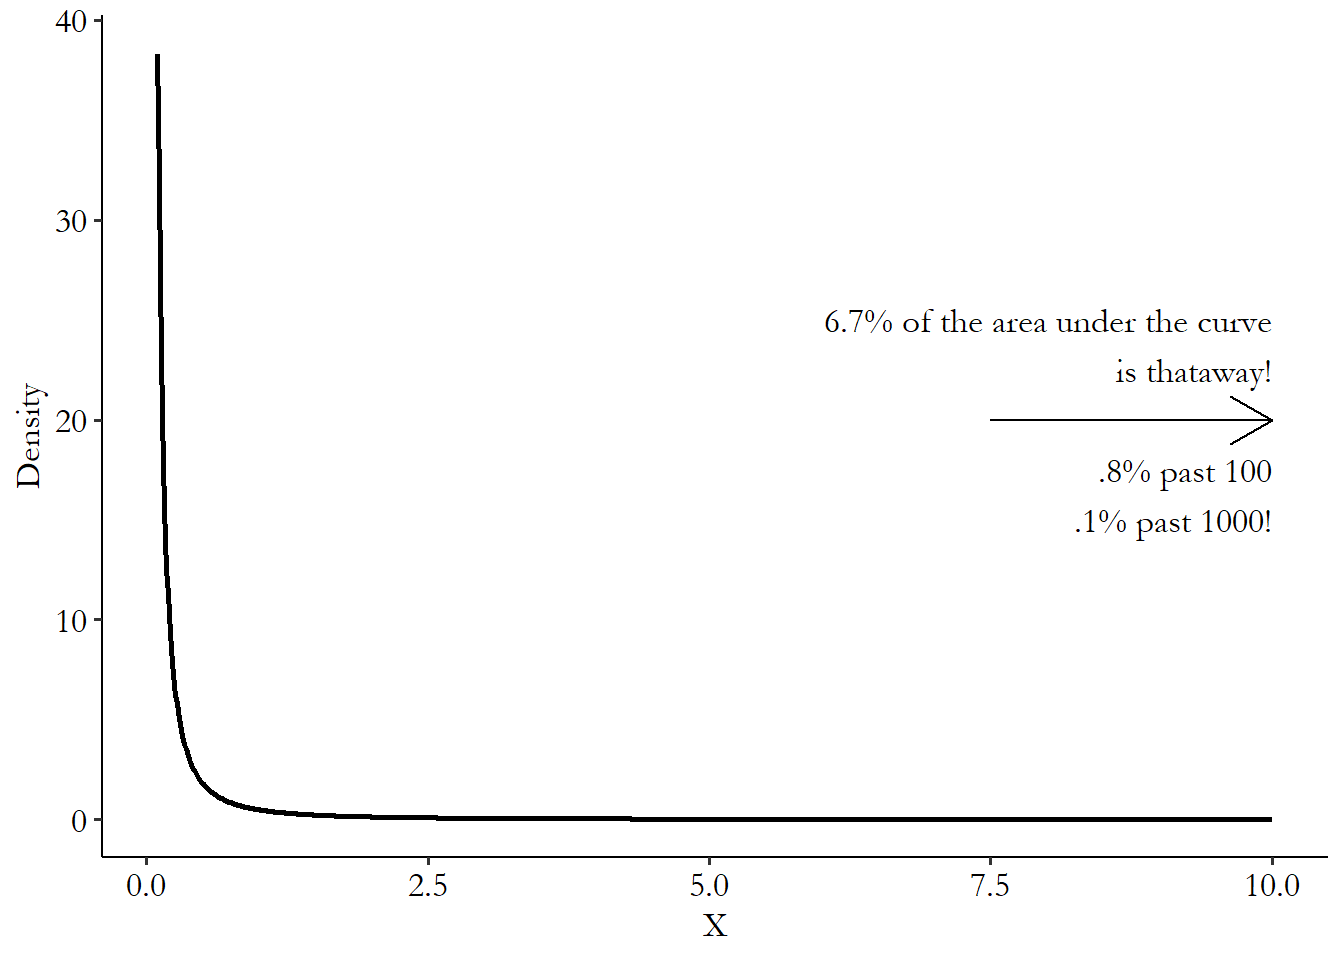 Graph showing a Pareto distribution, which has a lot of weight on the left, but even though the density drops quickly, nearly to zero, by the time we get to the right side of the graph there's still a large portion of the area left to go.